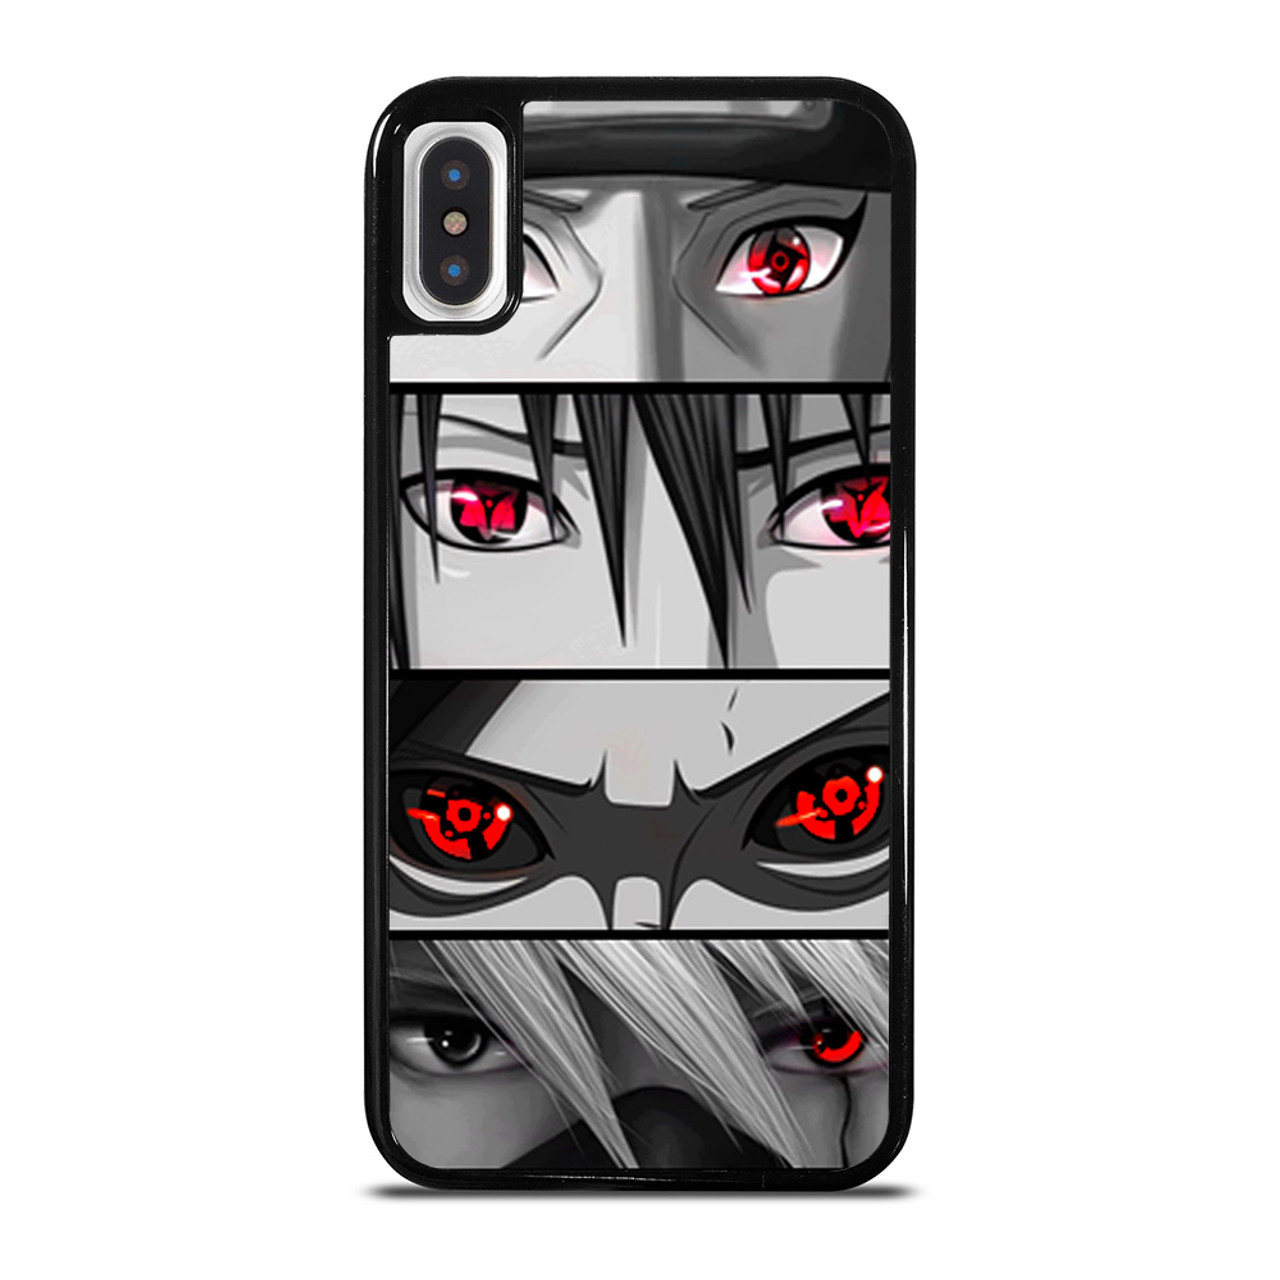 DEMON SLAYER CHARACTER ANIME iPhone X / XS Case Cover